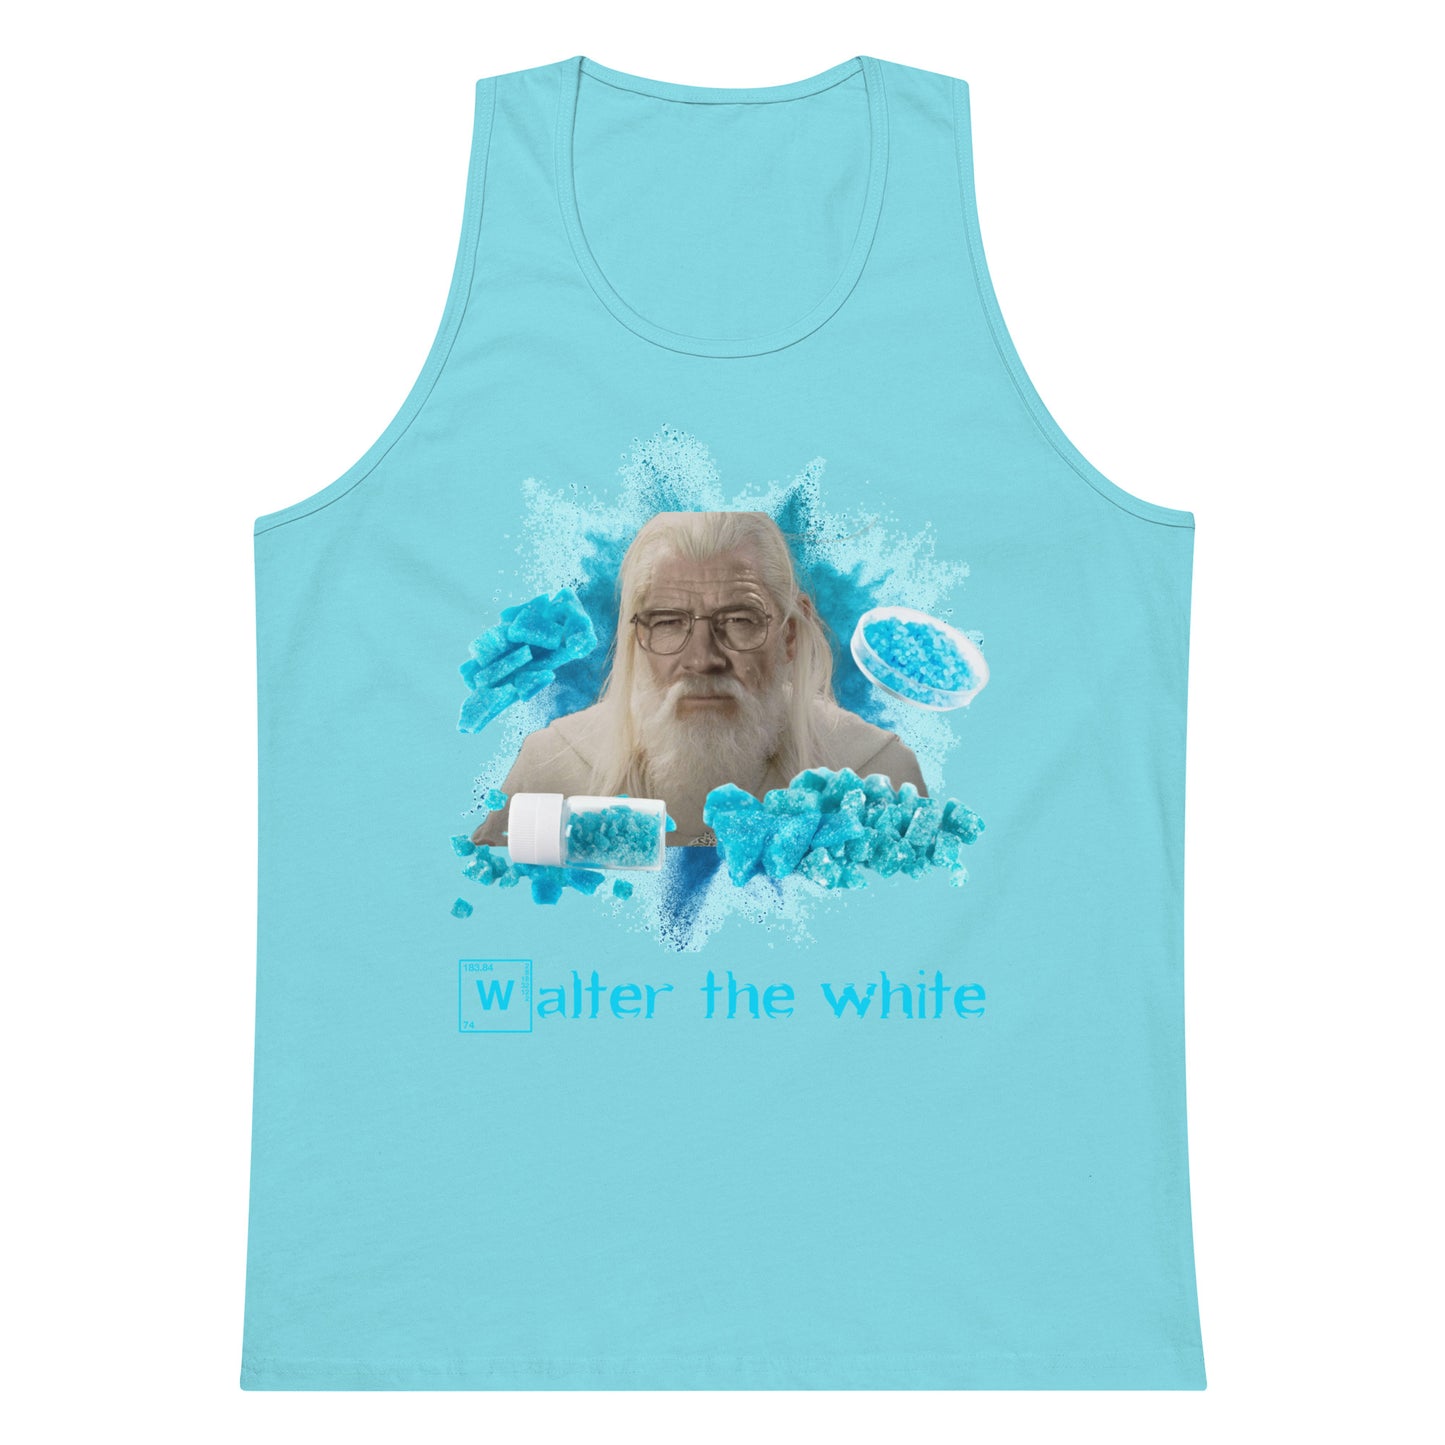 Walter the White (tank top)